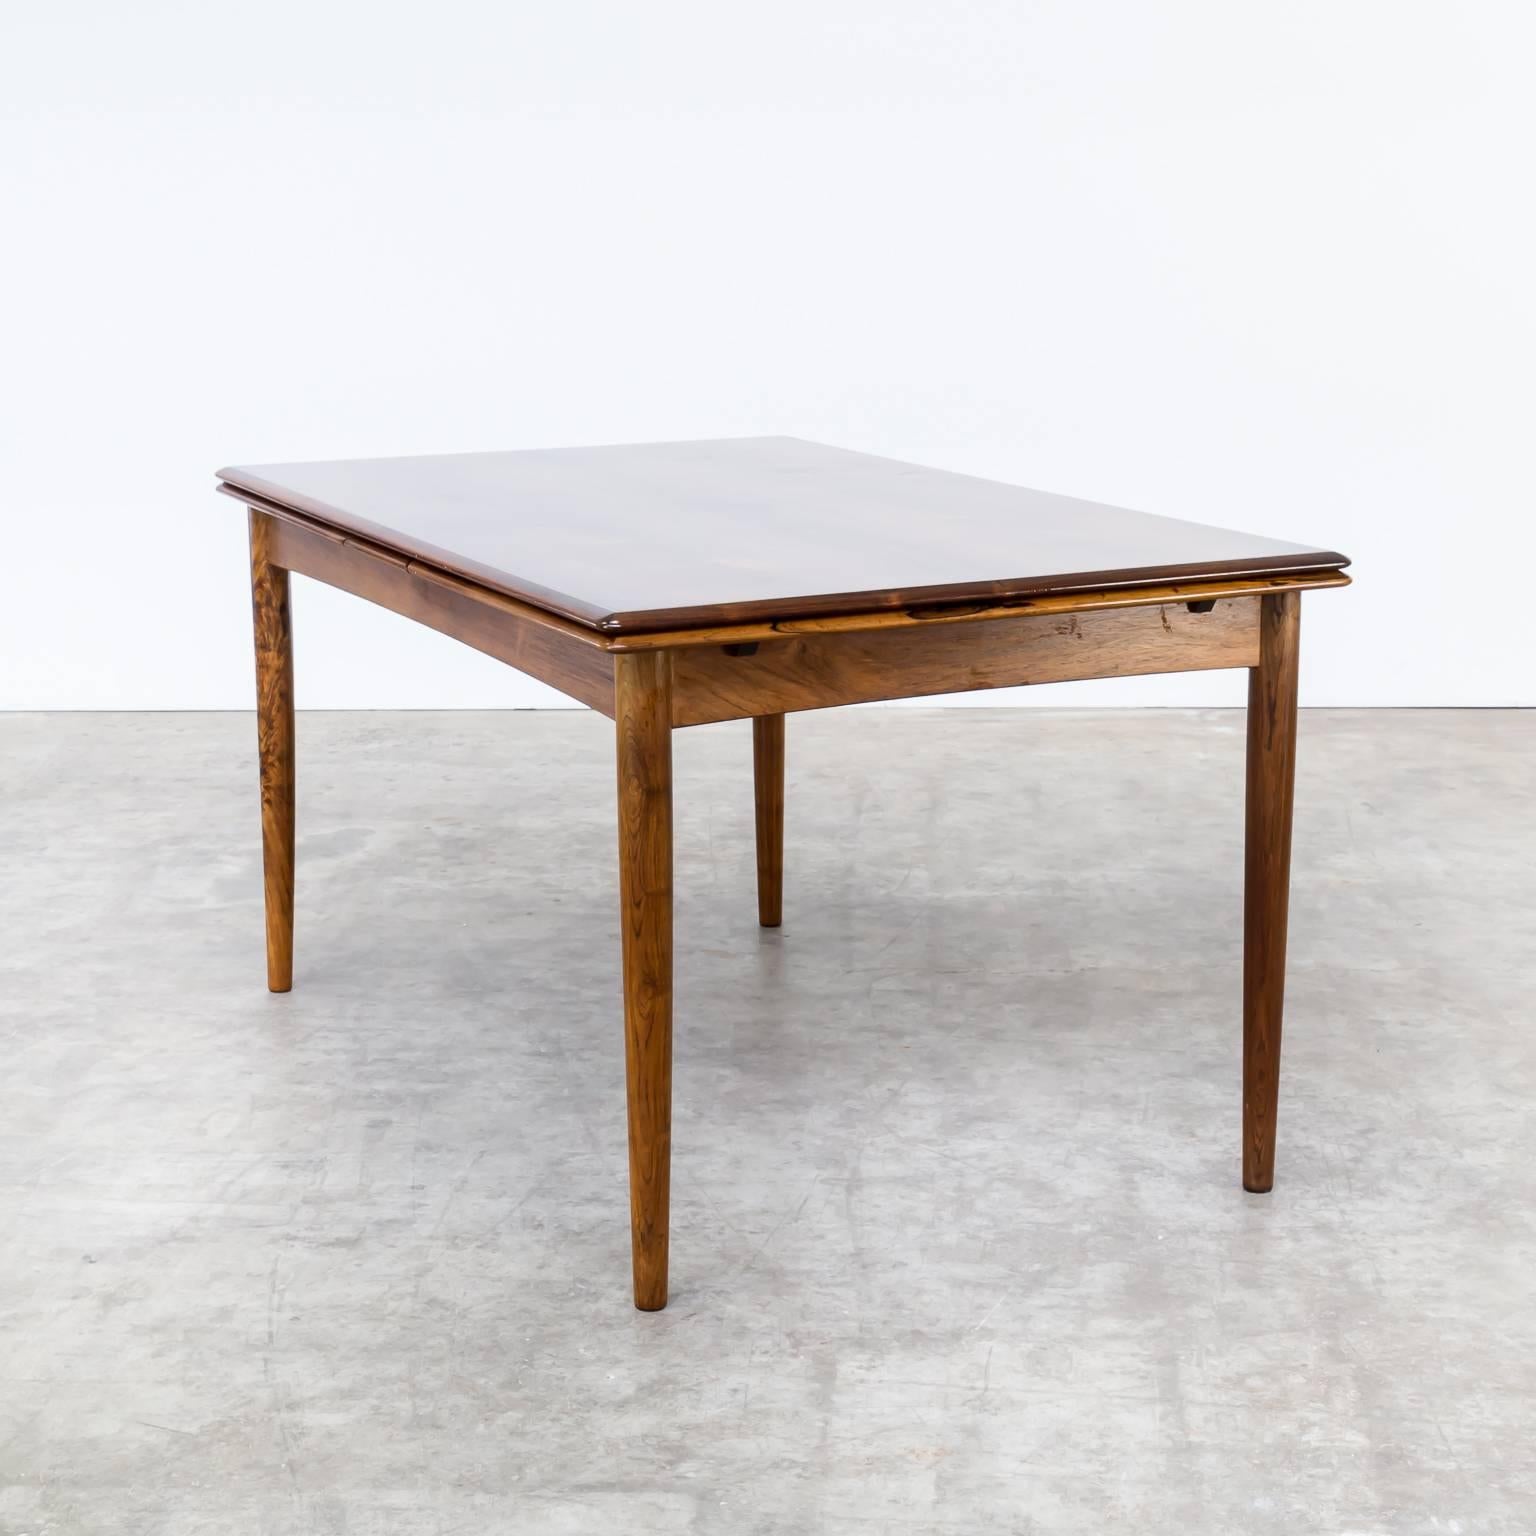 1960s rosewood dining table unmarked but attributed to Niels Otto Møller. Beautiful quality rosewood Danish design. Tapered legs and self-storing leaves. Good condition, consistent with age and use. Dimensions: 139-257cm (W) x 90cm (D) x75cm (H).